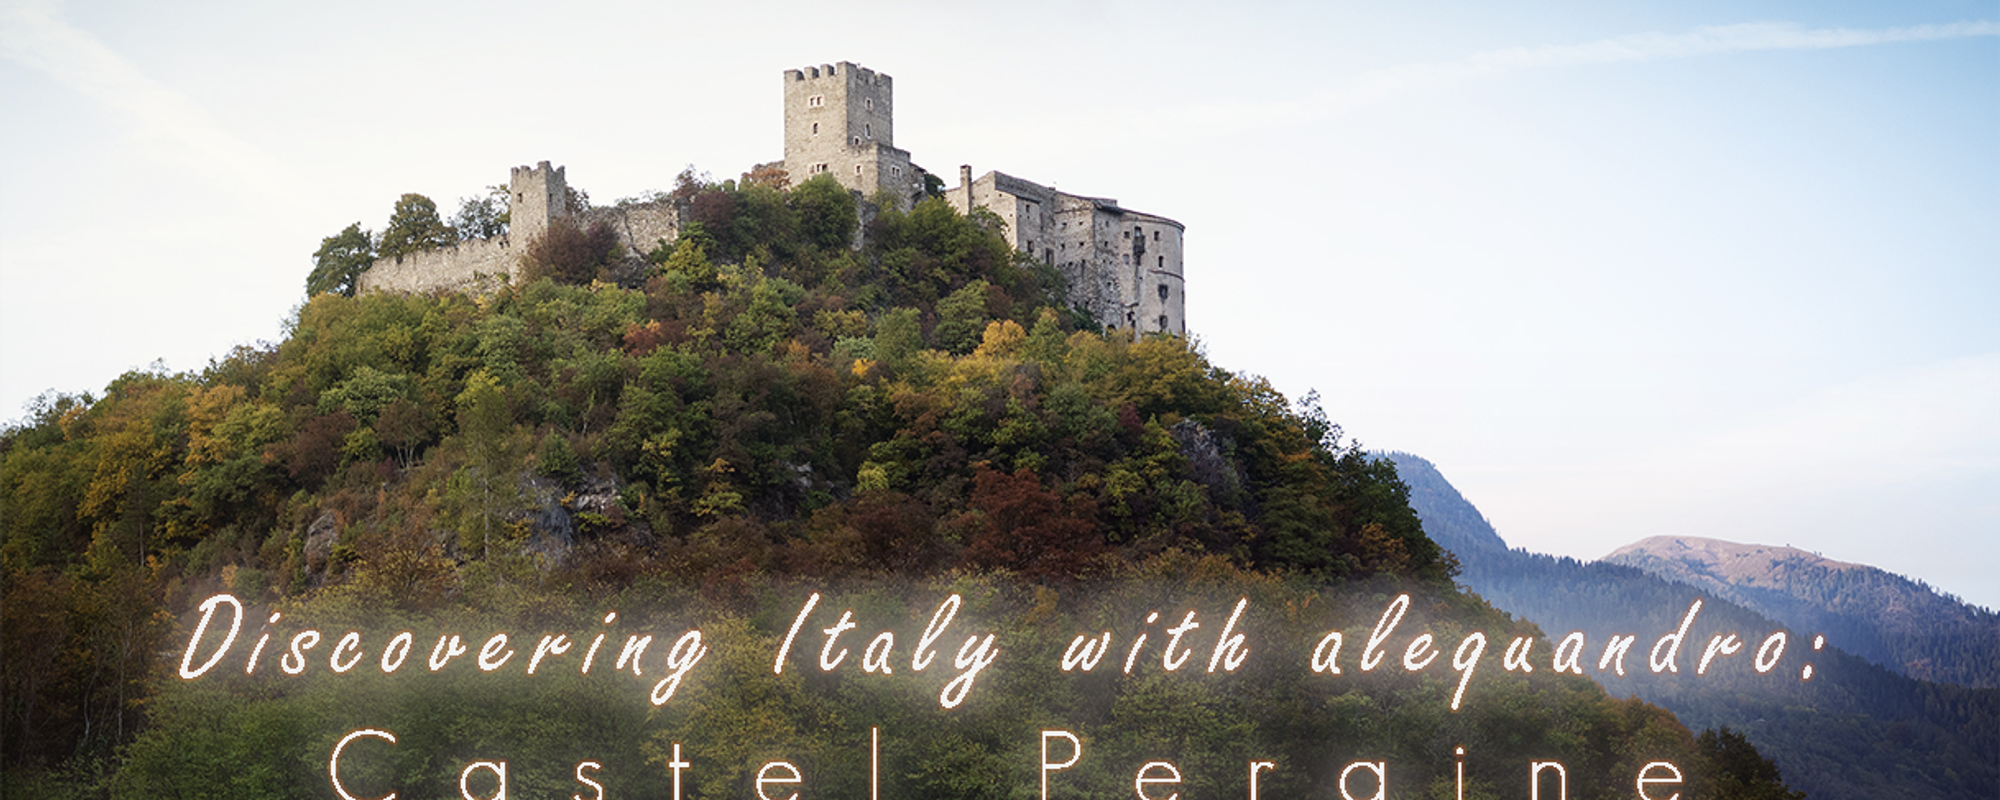  Visit to Pergine Castle in Trentino Alto Adige - Discovering Italy with alequandro